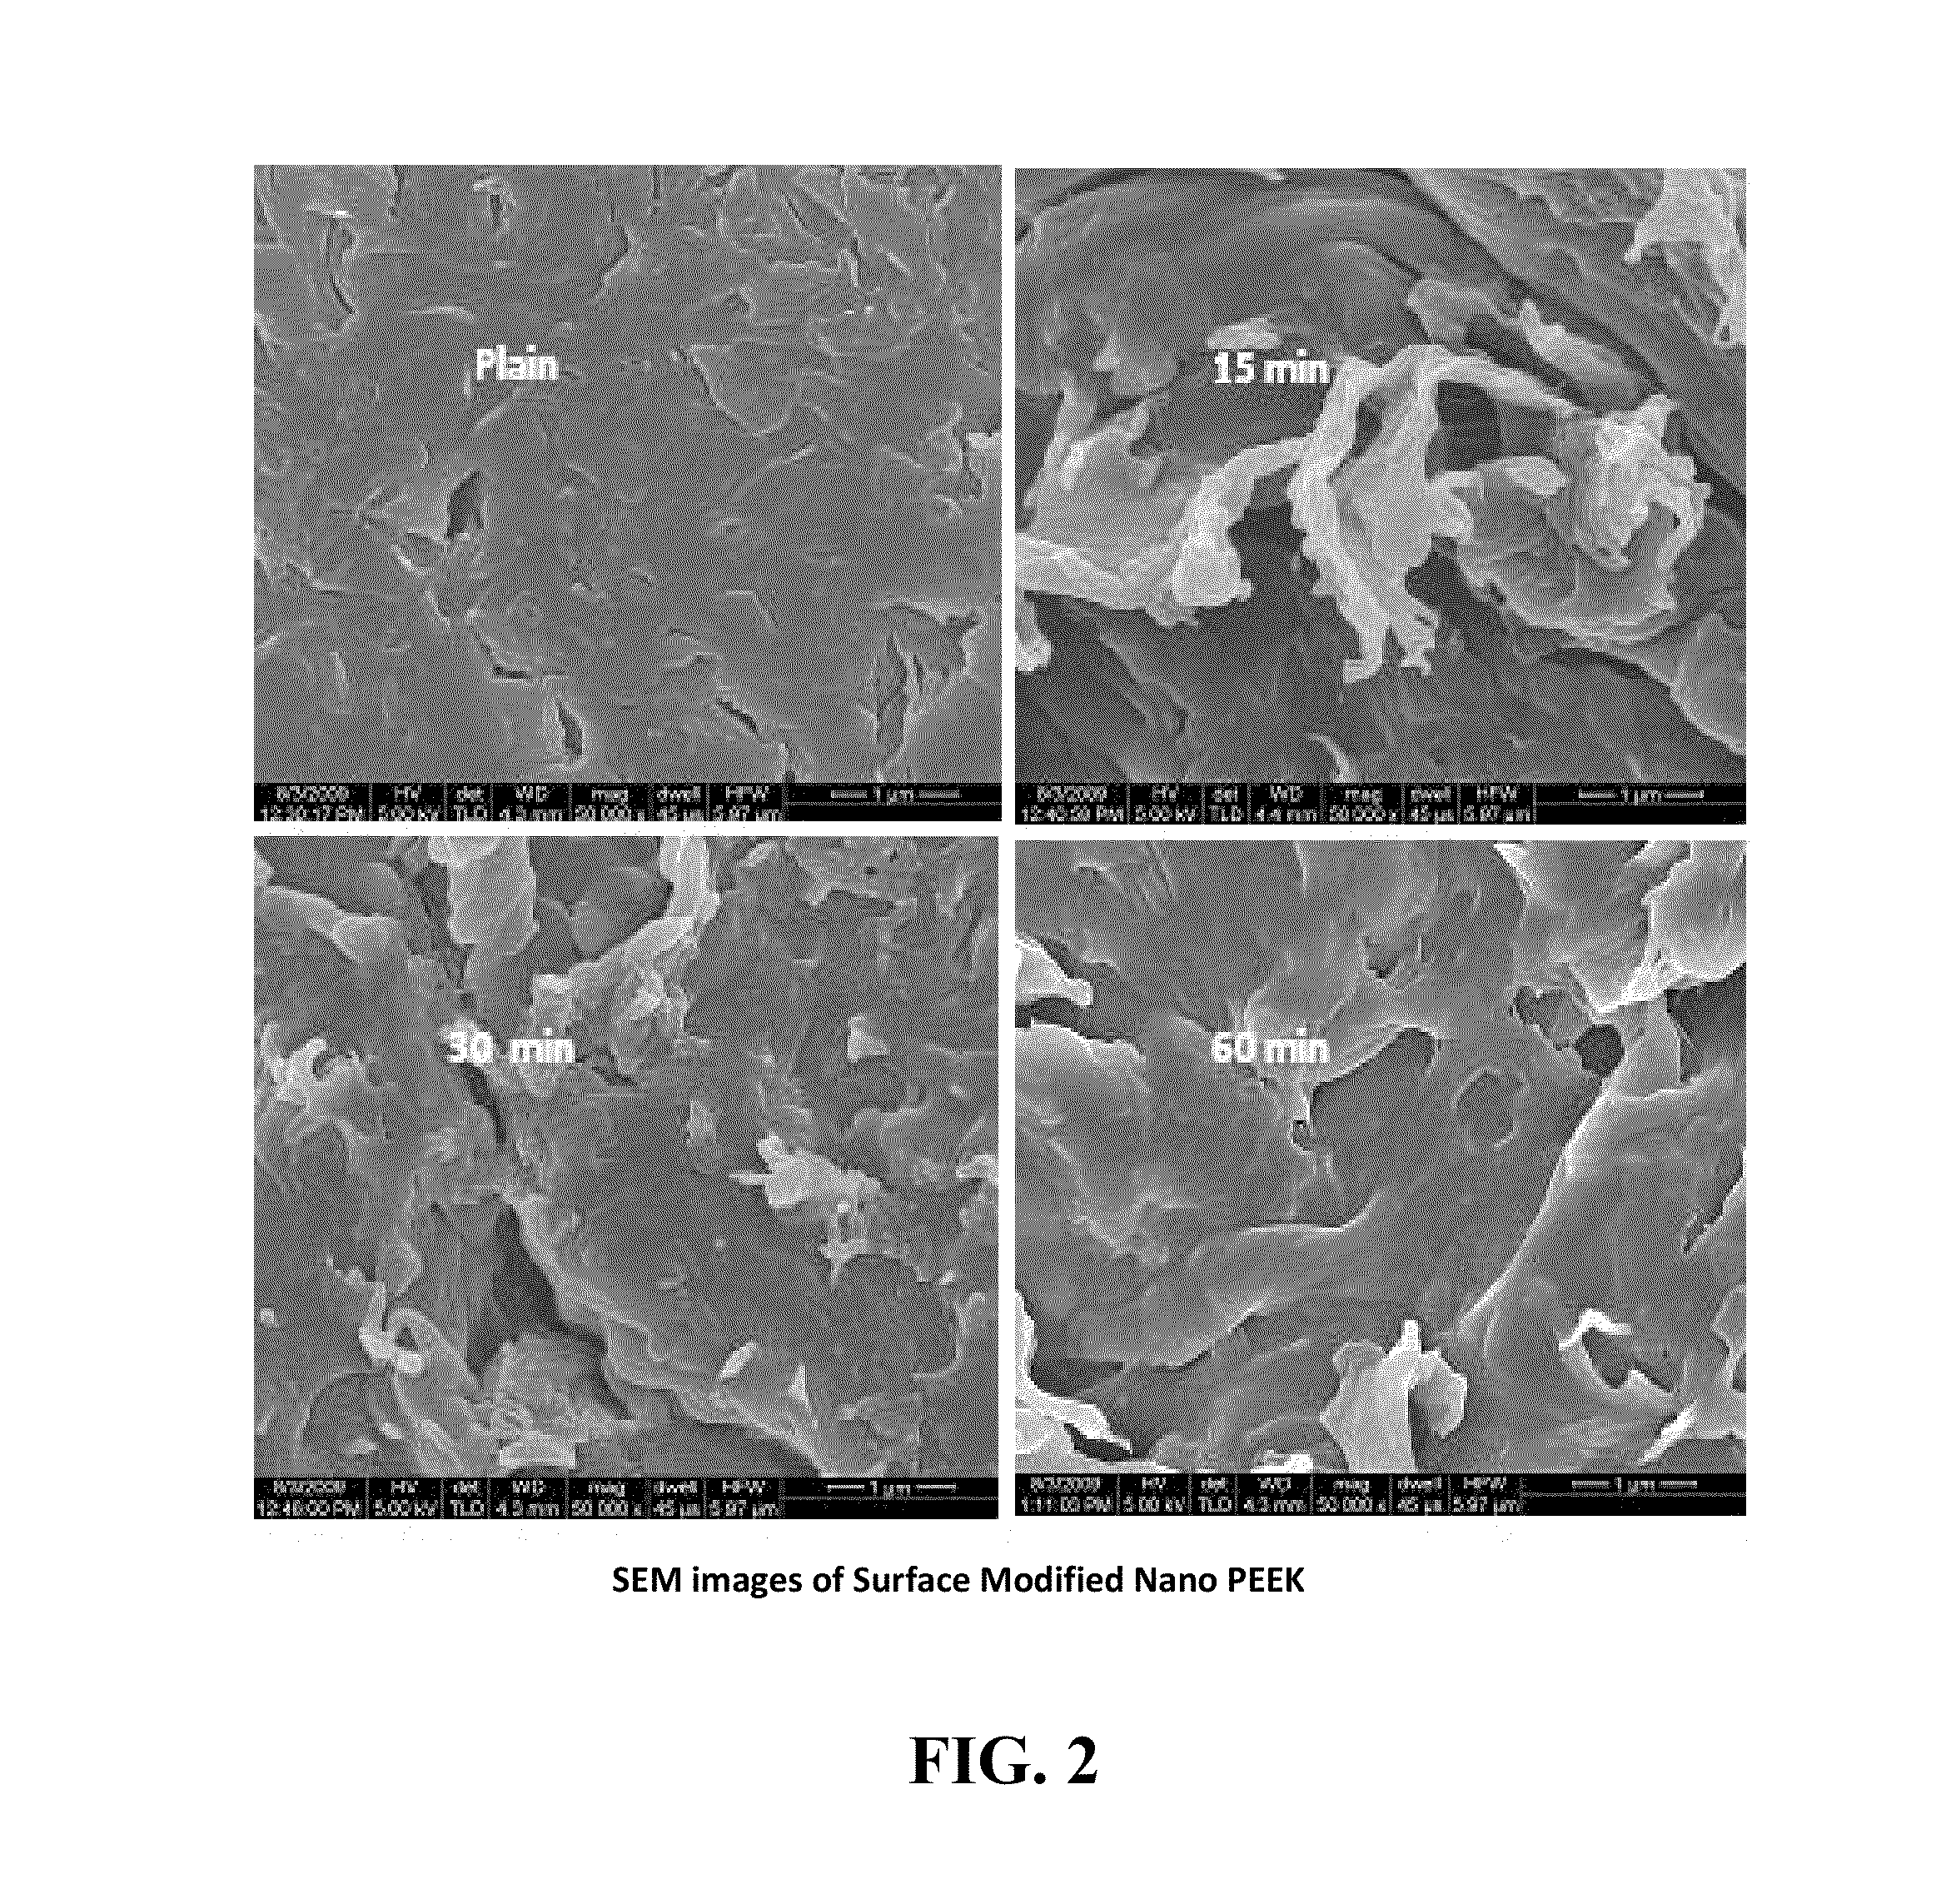 Method for producing nanosurfaces with nano, micron, and/or submicron structures on a polymer